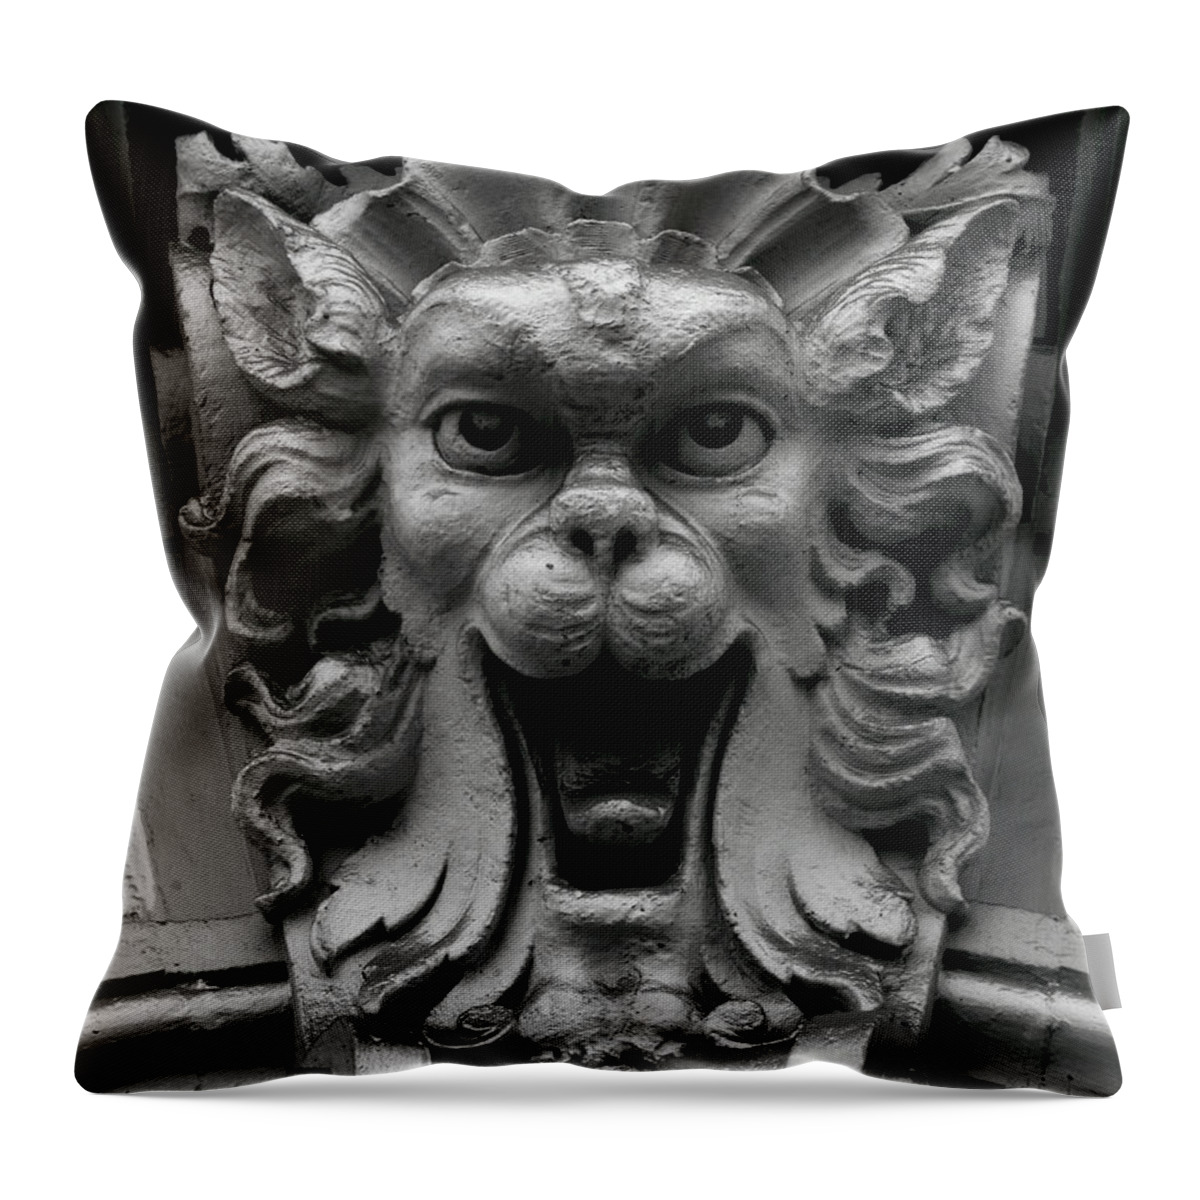 Strange Throw Pillow featuring the photograph Smiling creature by Emme Pons